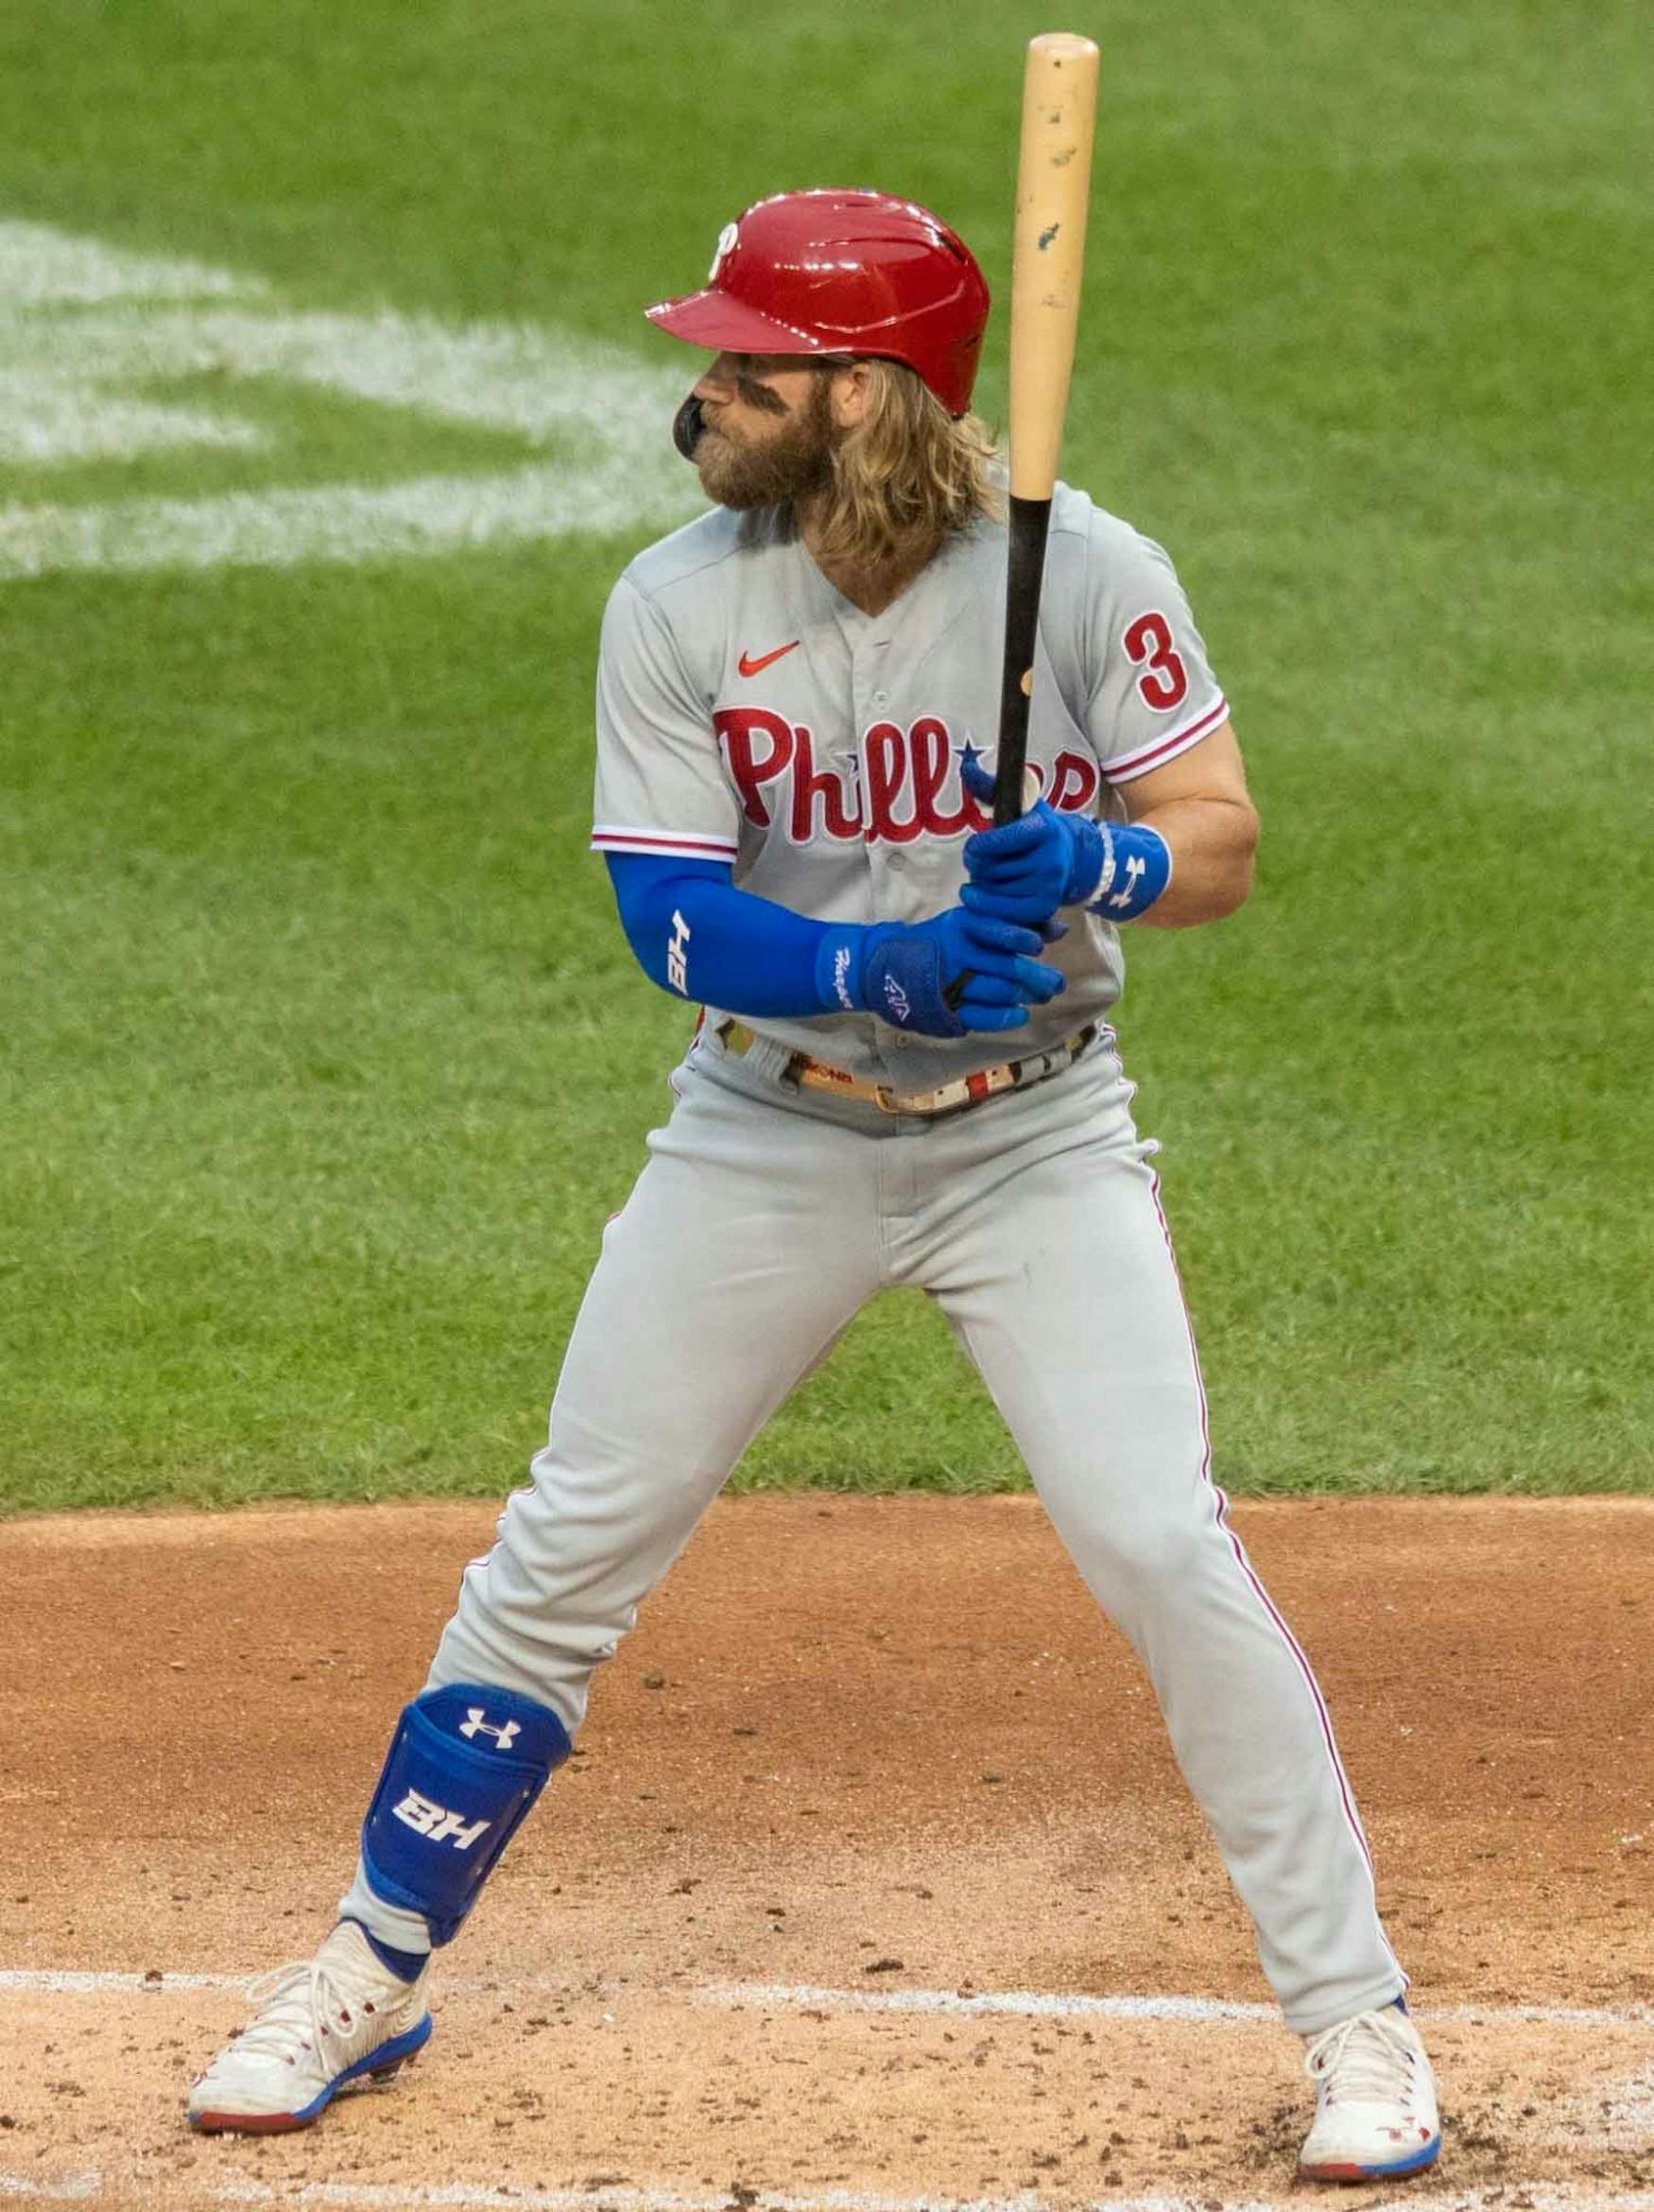 Bryce_Harper_Nationals_vs._Phillies_at_Nationals_Park,_August_25,_2020_(All-Pro_Reels_Photography)_(50271580782)_(cropped).jpg